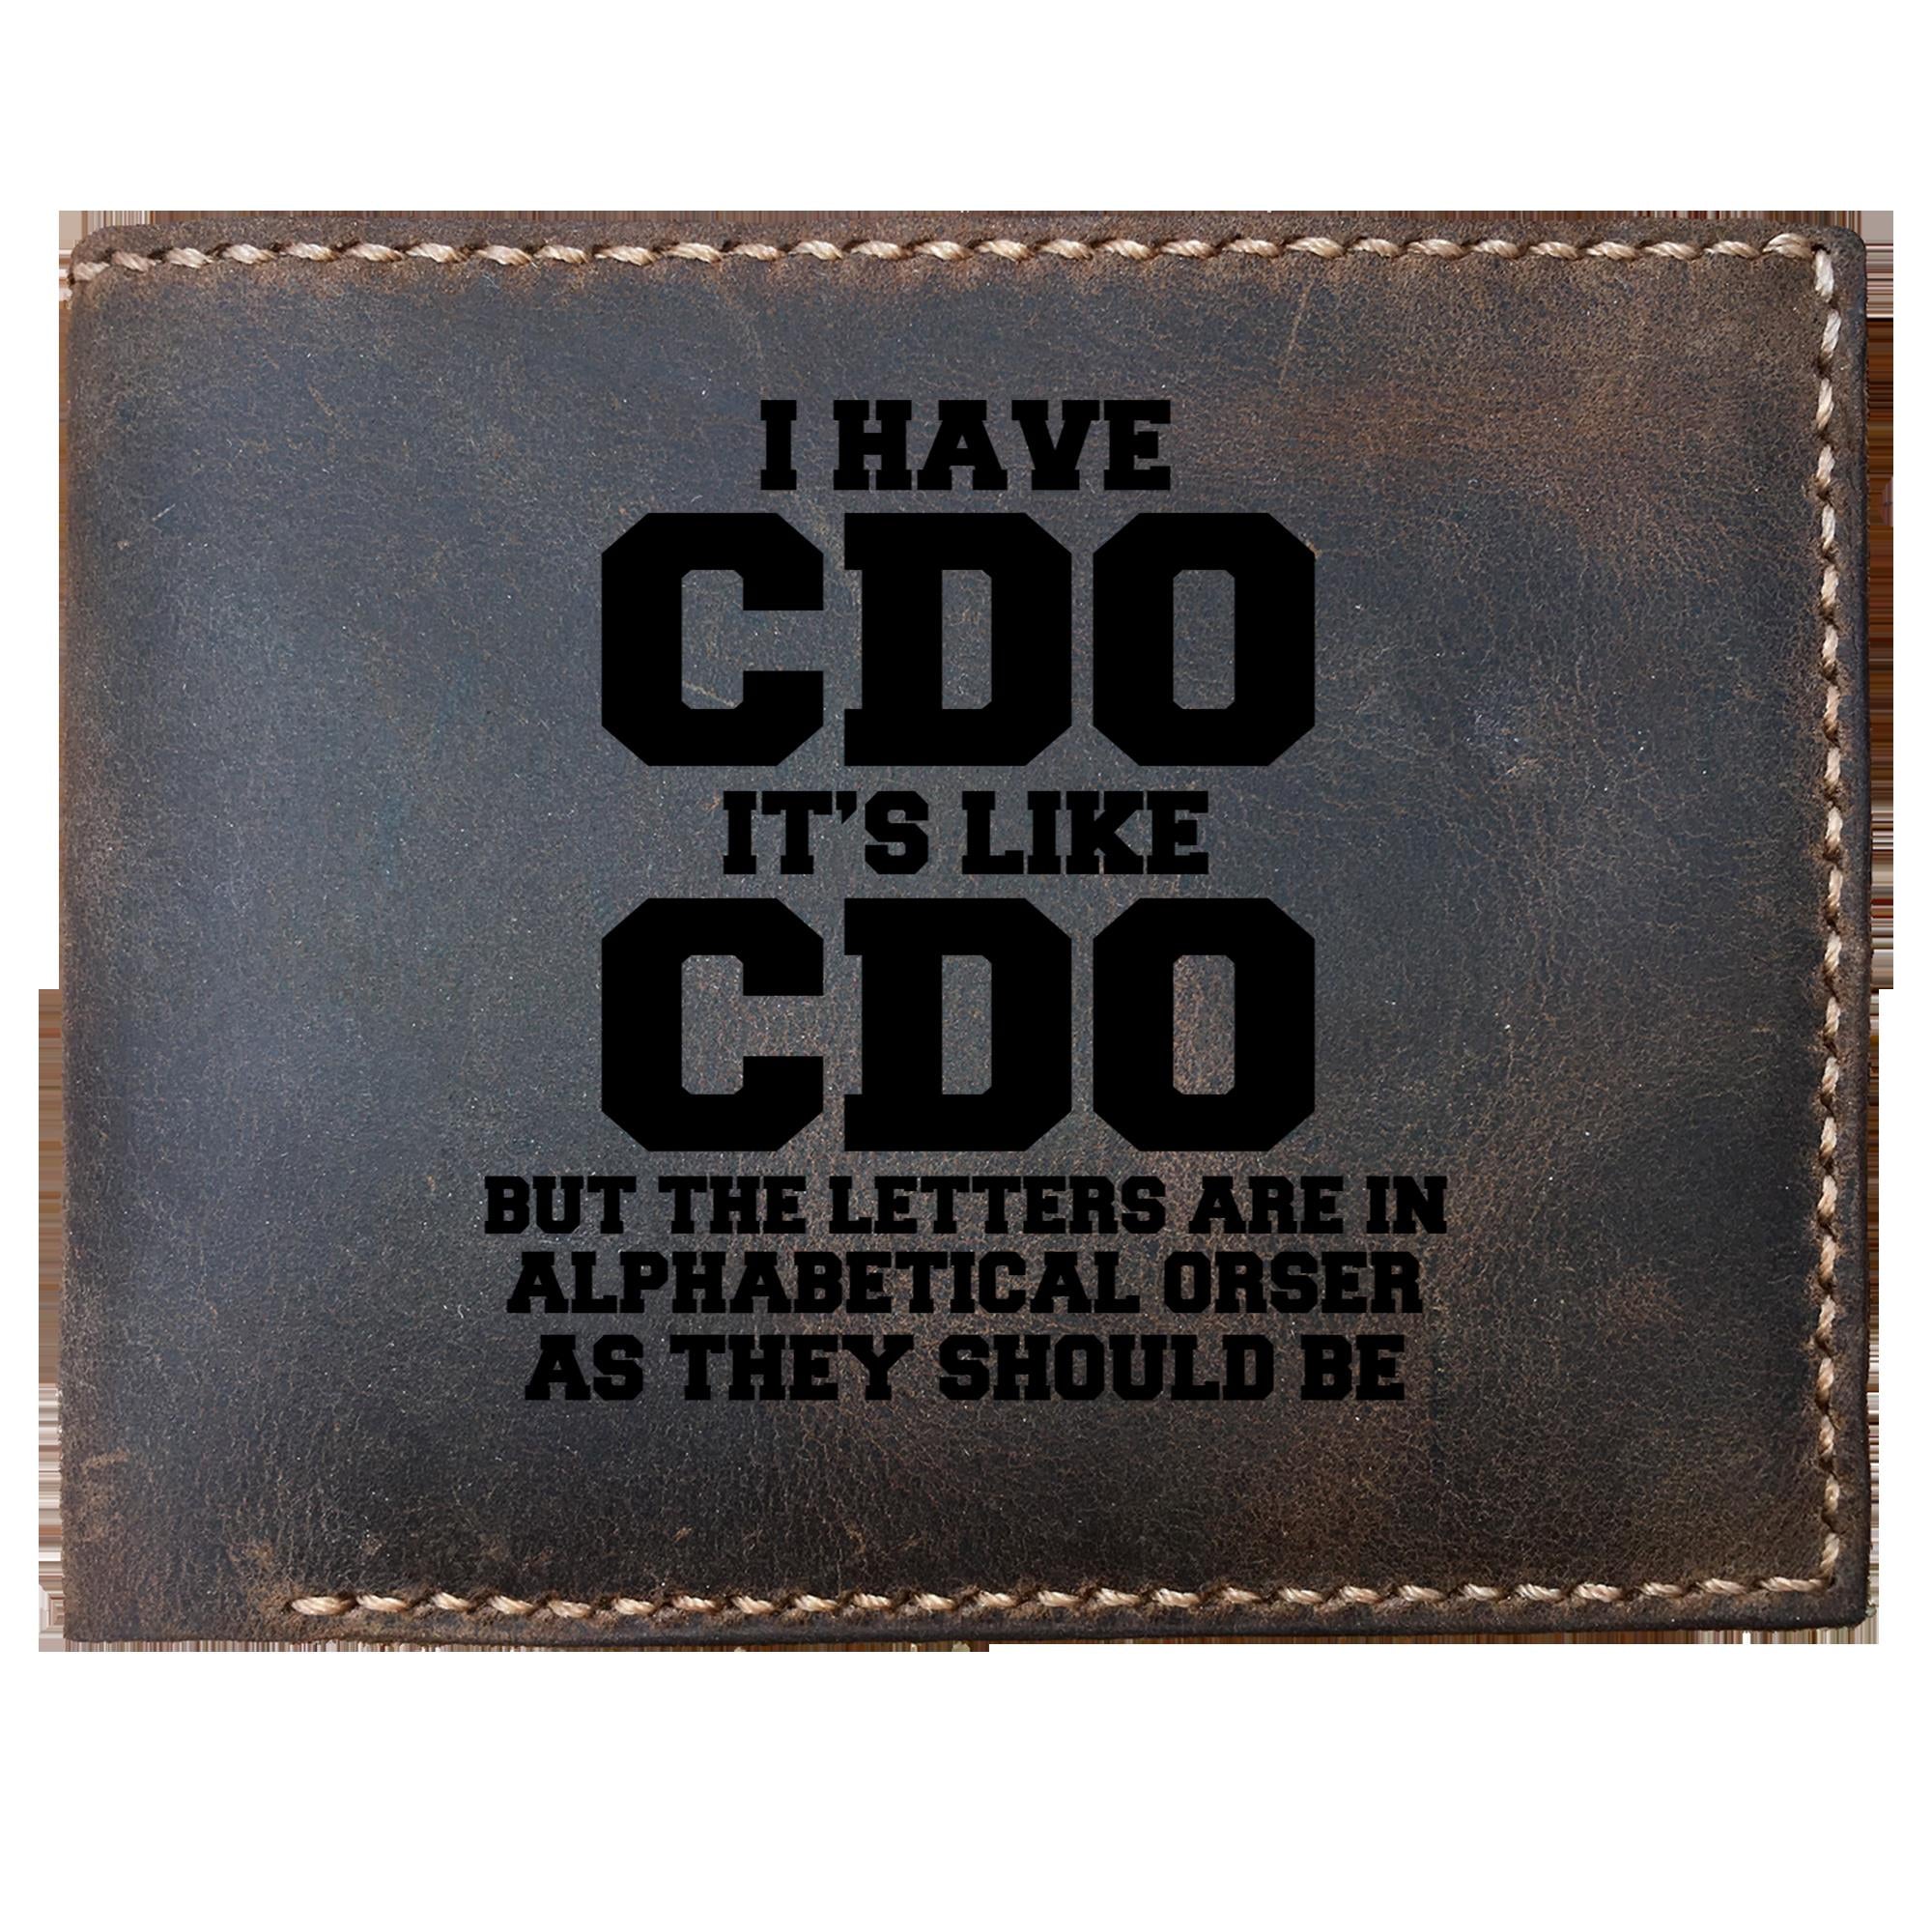 Skitongifts Funny Custom Laser Engraved Bifold Leather Wallet For Men, I Have Cdo It's Like Ocd But The Letters Are In Anphabetical